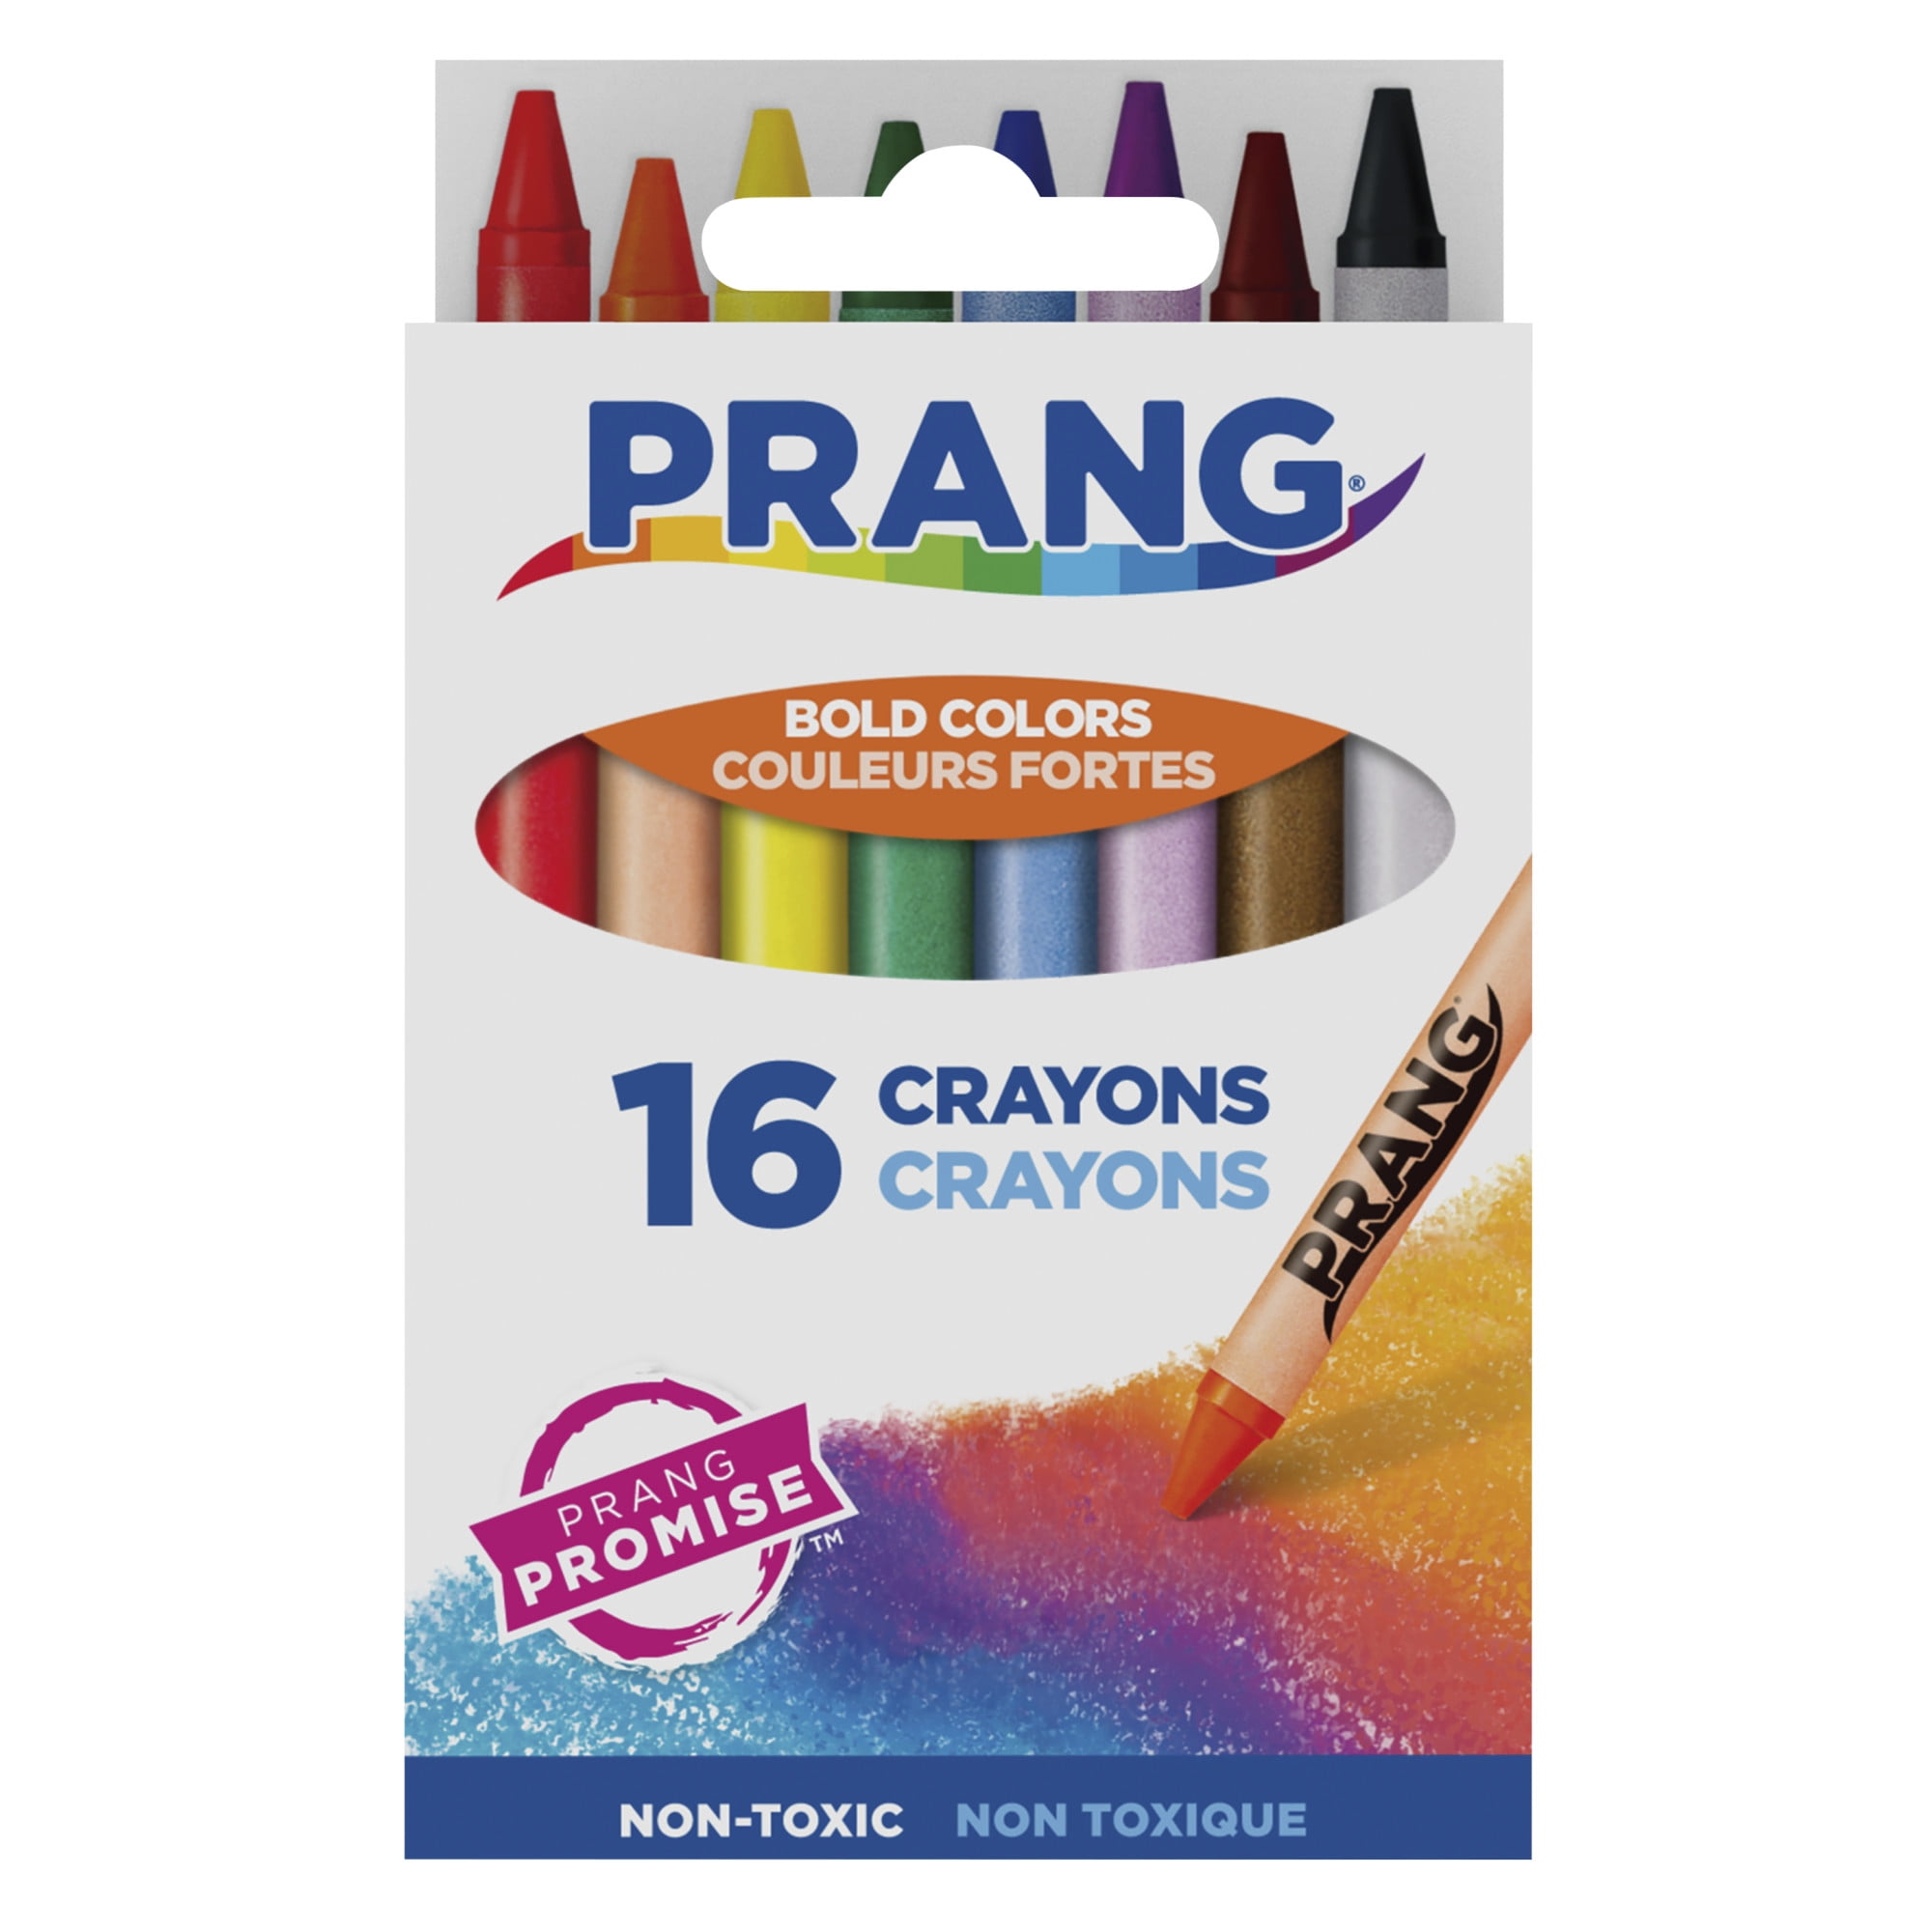 Crayola® Colors of the World Classpack (480 Count)